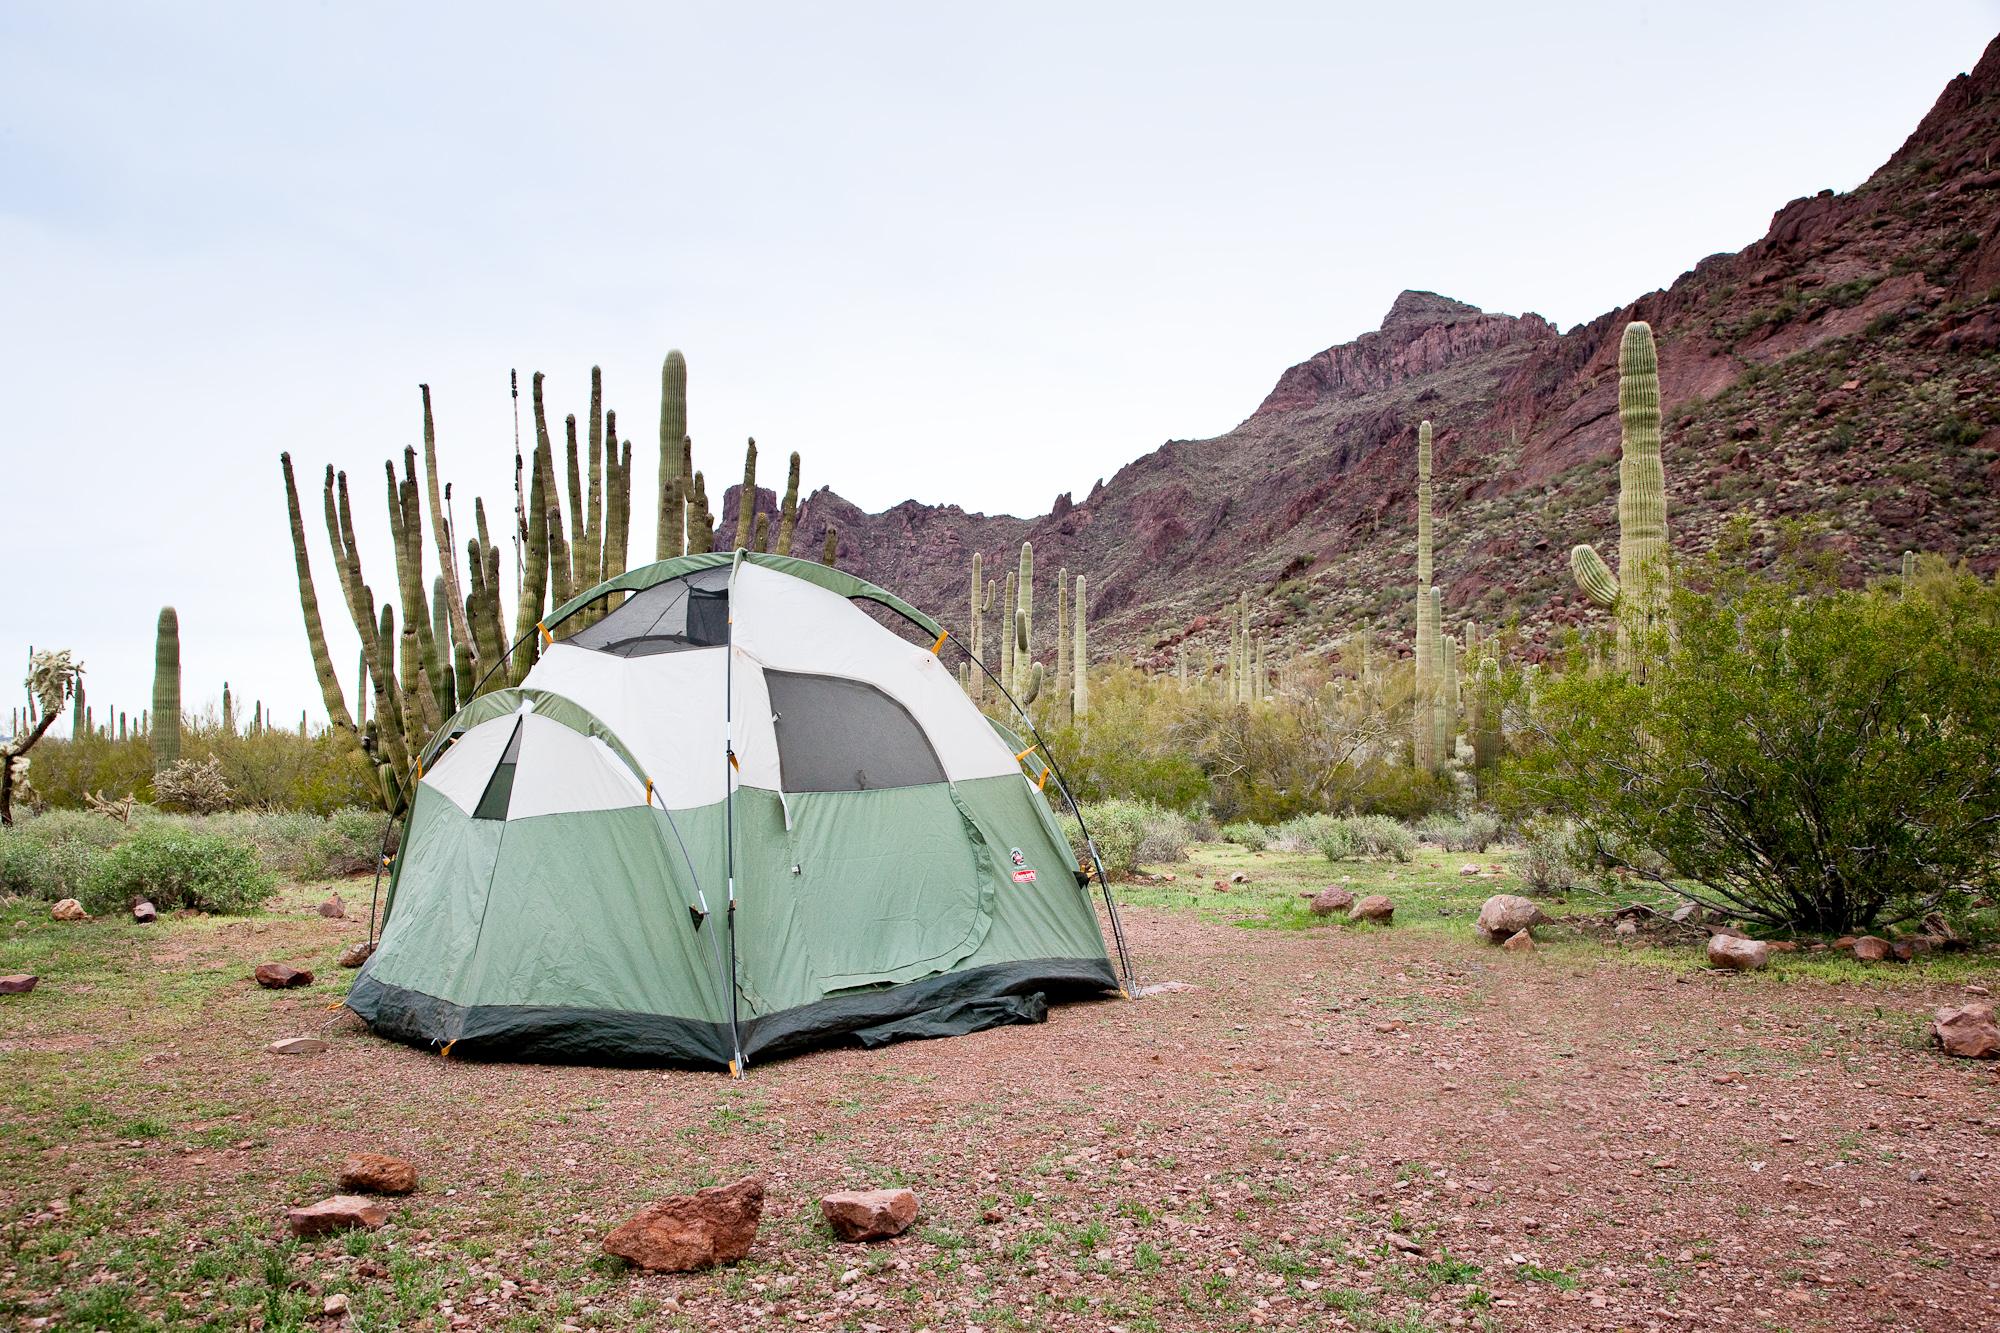 tent pitched on the ground at alamo canyon in front of saguaro and organ pipe cacti